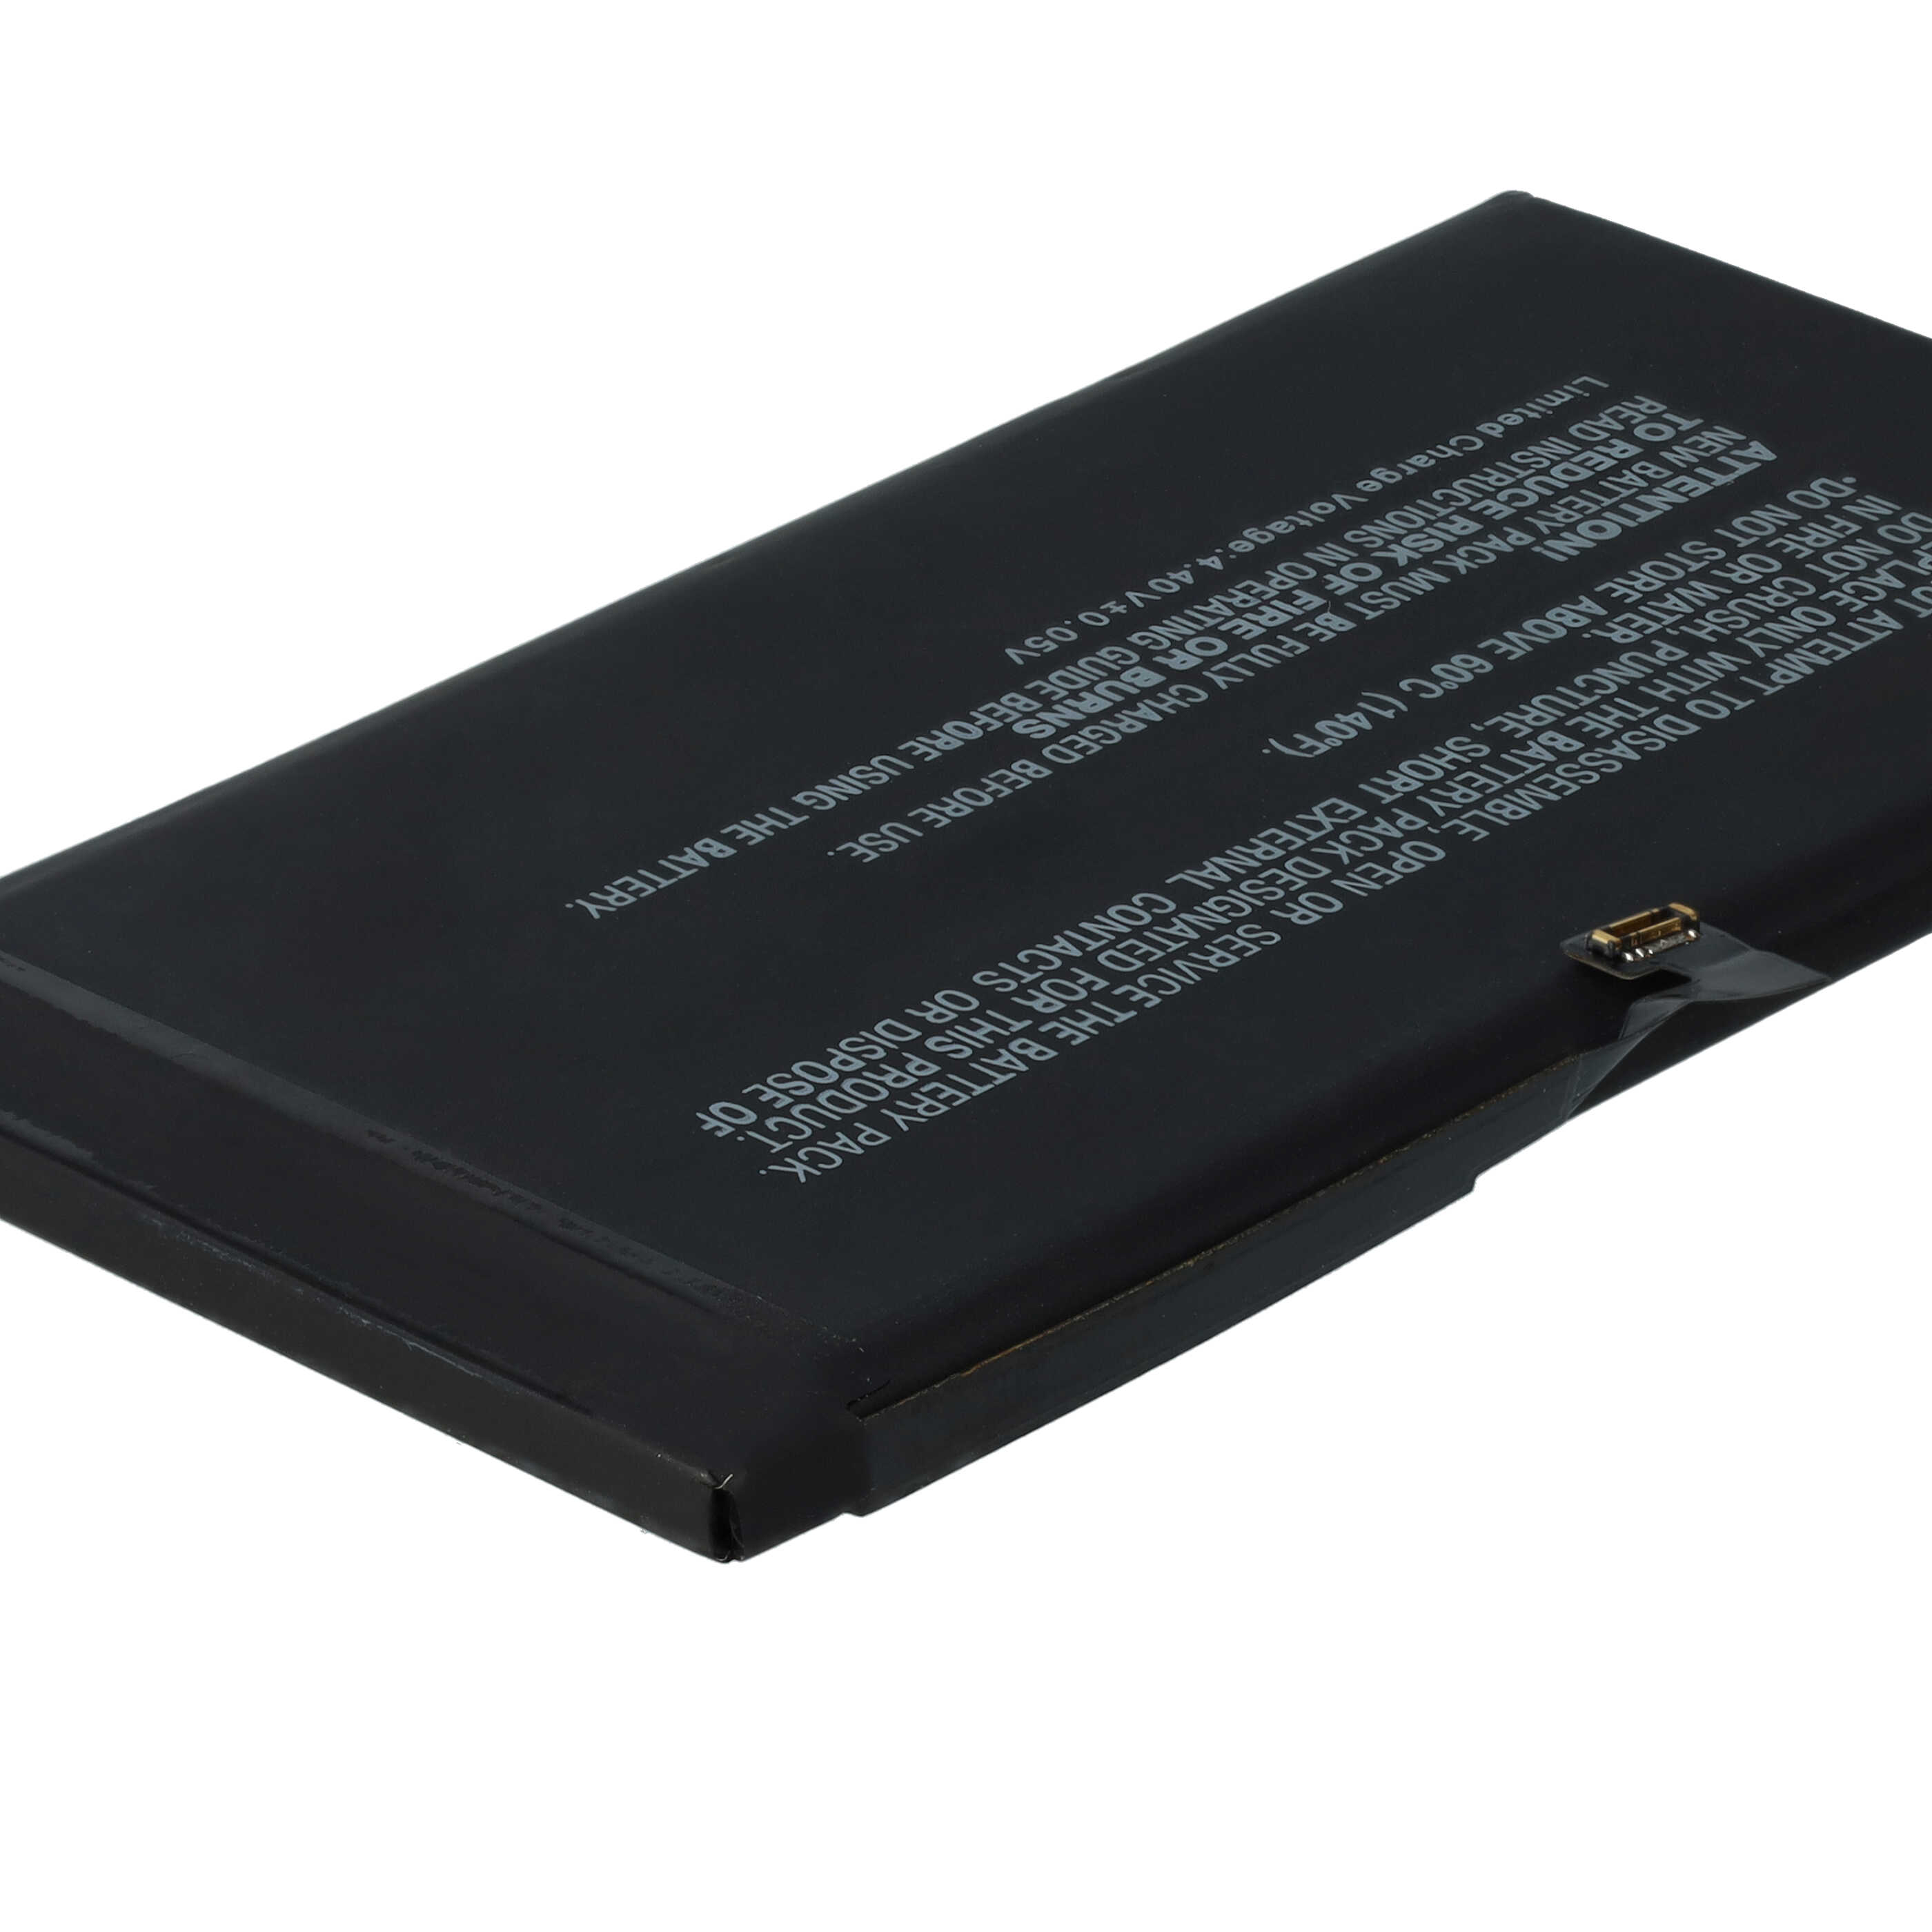 Mobile Phone Battery Replacement for Apple A2431, A2479 - 3350mAh 3.83V Li-polymer